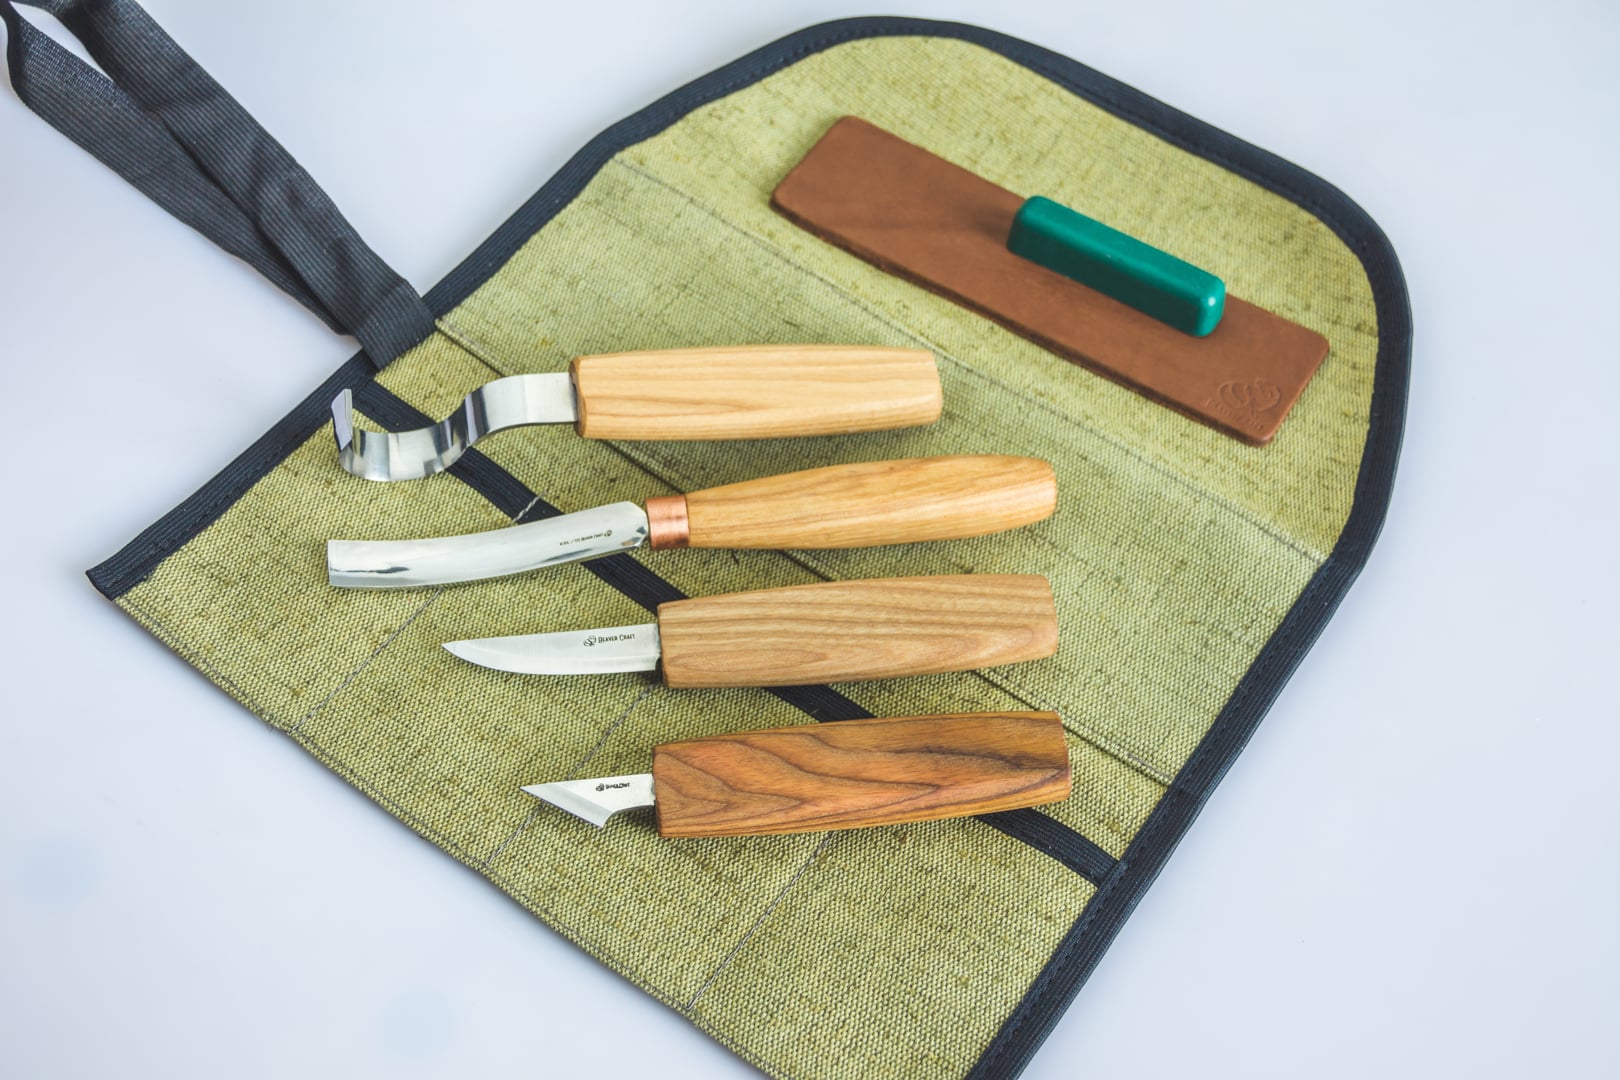 Wood Carving Tool Set for Spoon Carving - S13X forged carving chisels  Bushcraft, Living History, Crafts 